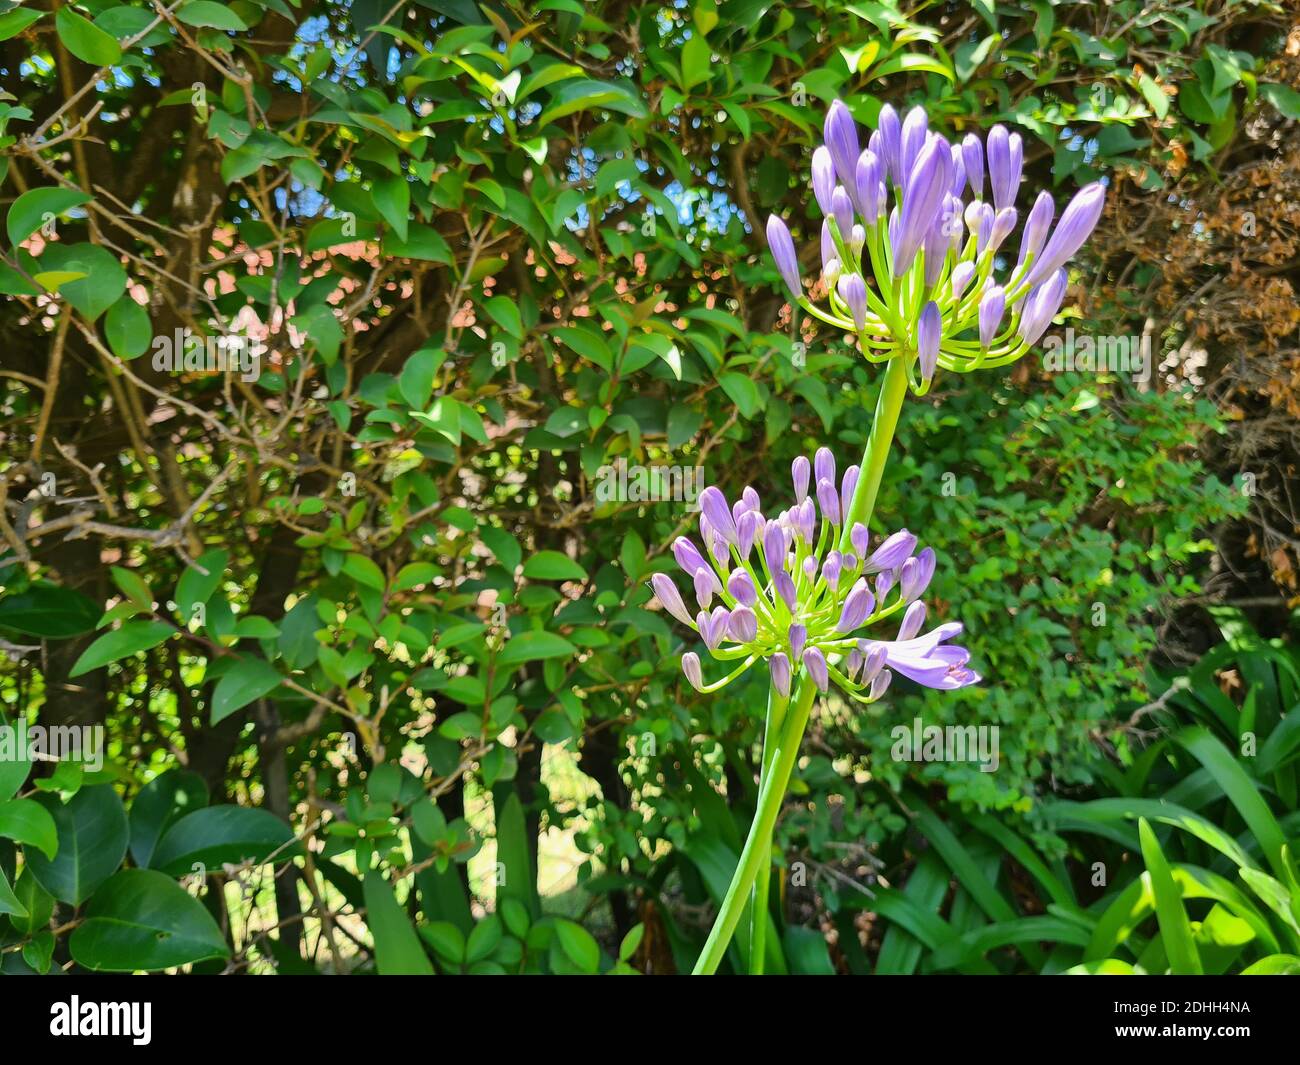 A view of agapanthus flowers in the field Stock Photo